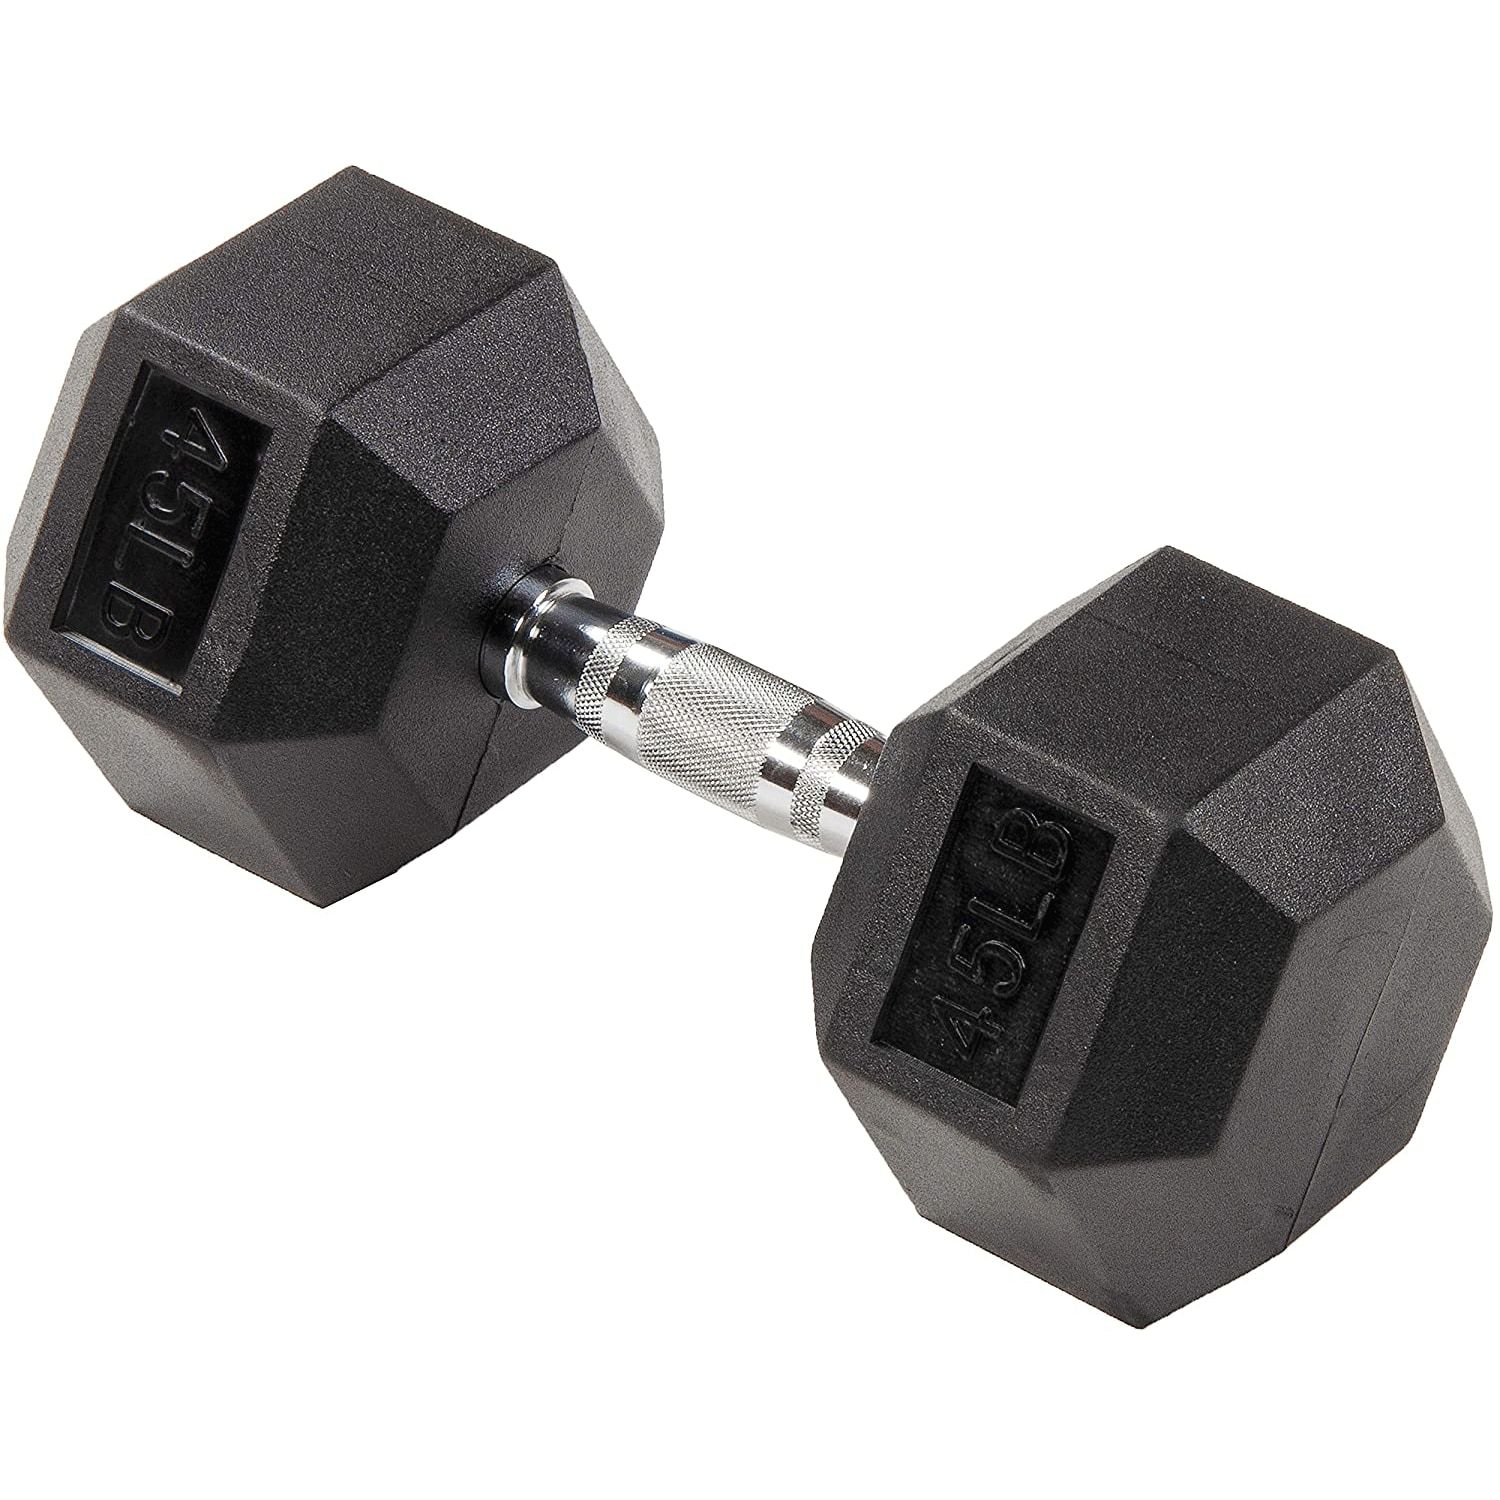 FREE SHIPPING 25 lbs total CAP 25 lb Single Rubber Coated Hex Dumbbell Weight 